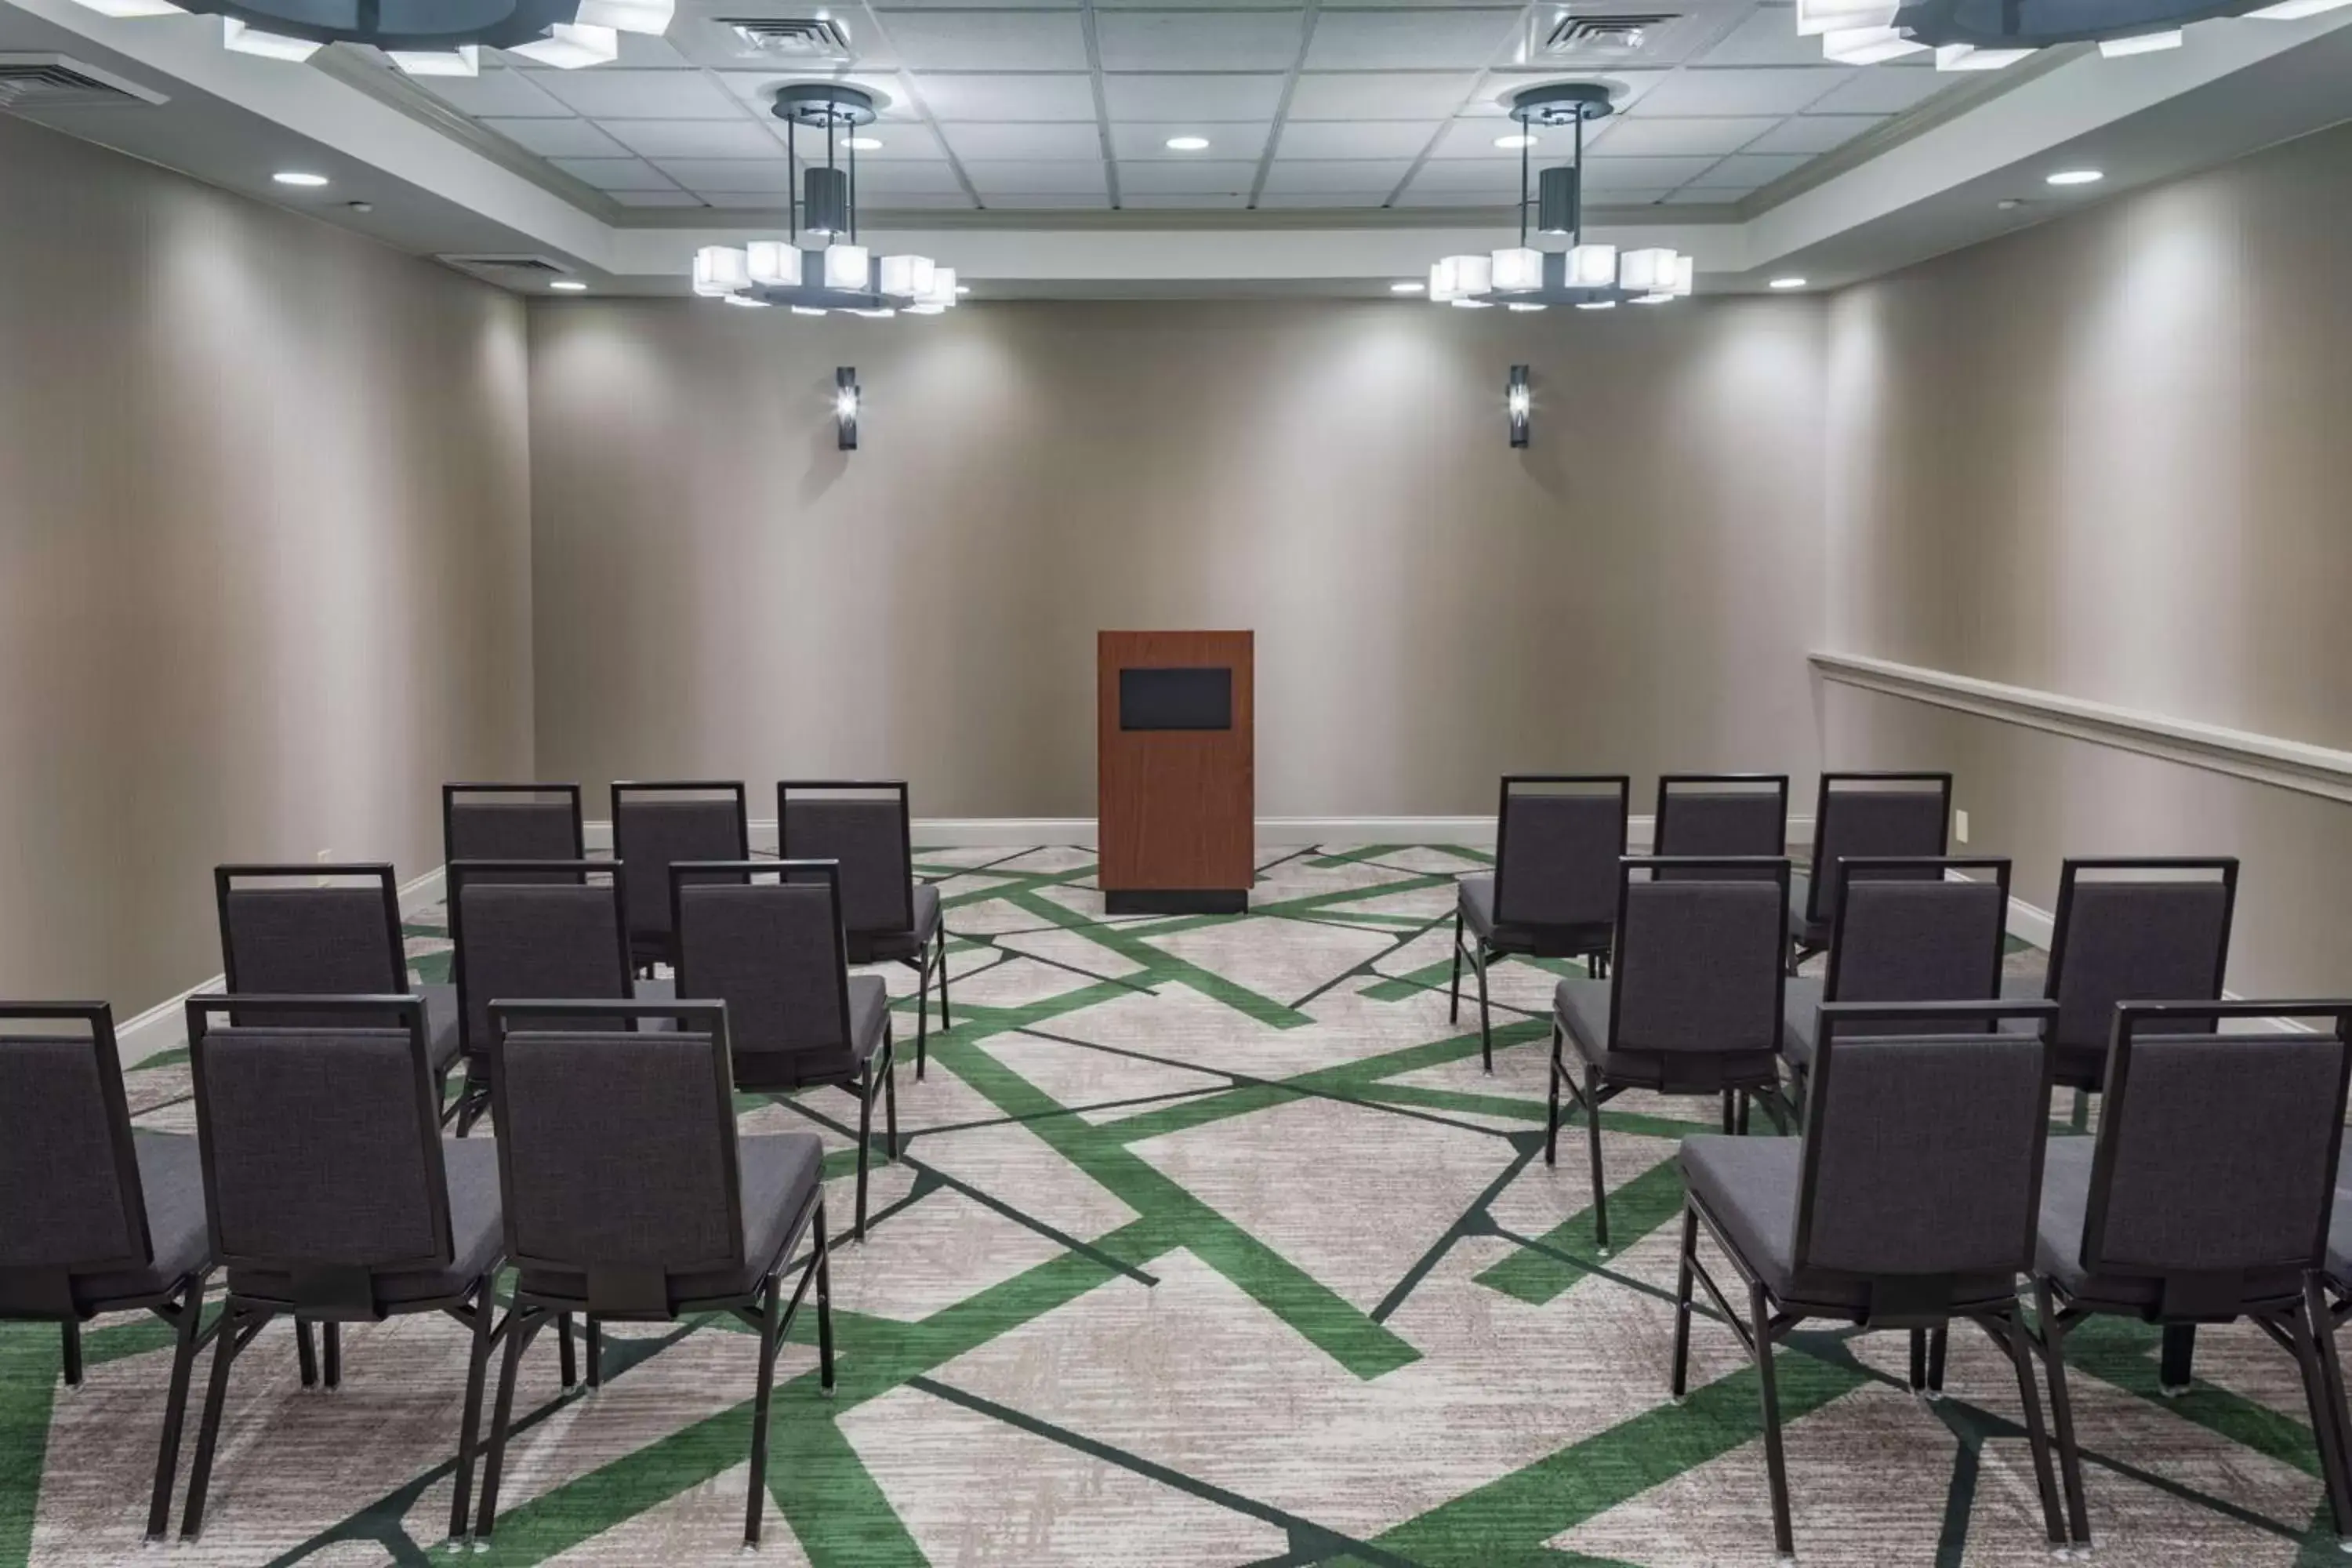 Meeting/conference room in Hilton Birmingham Downtown at UAB